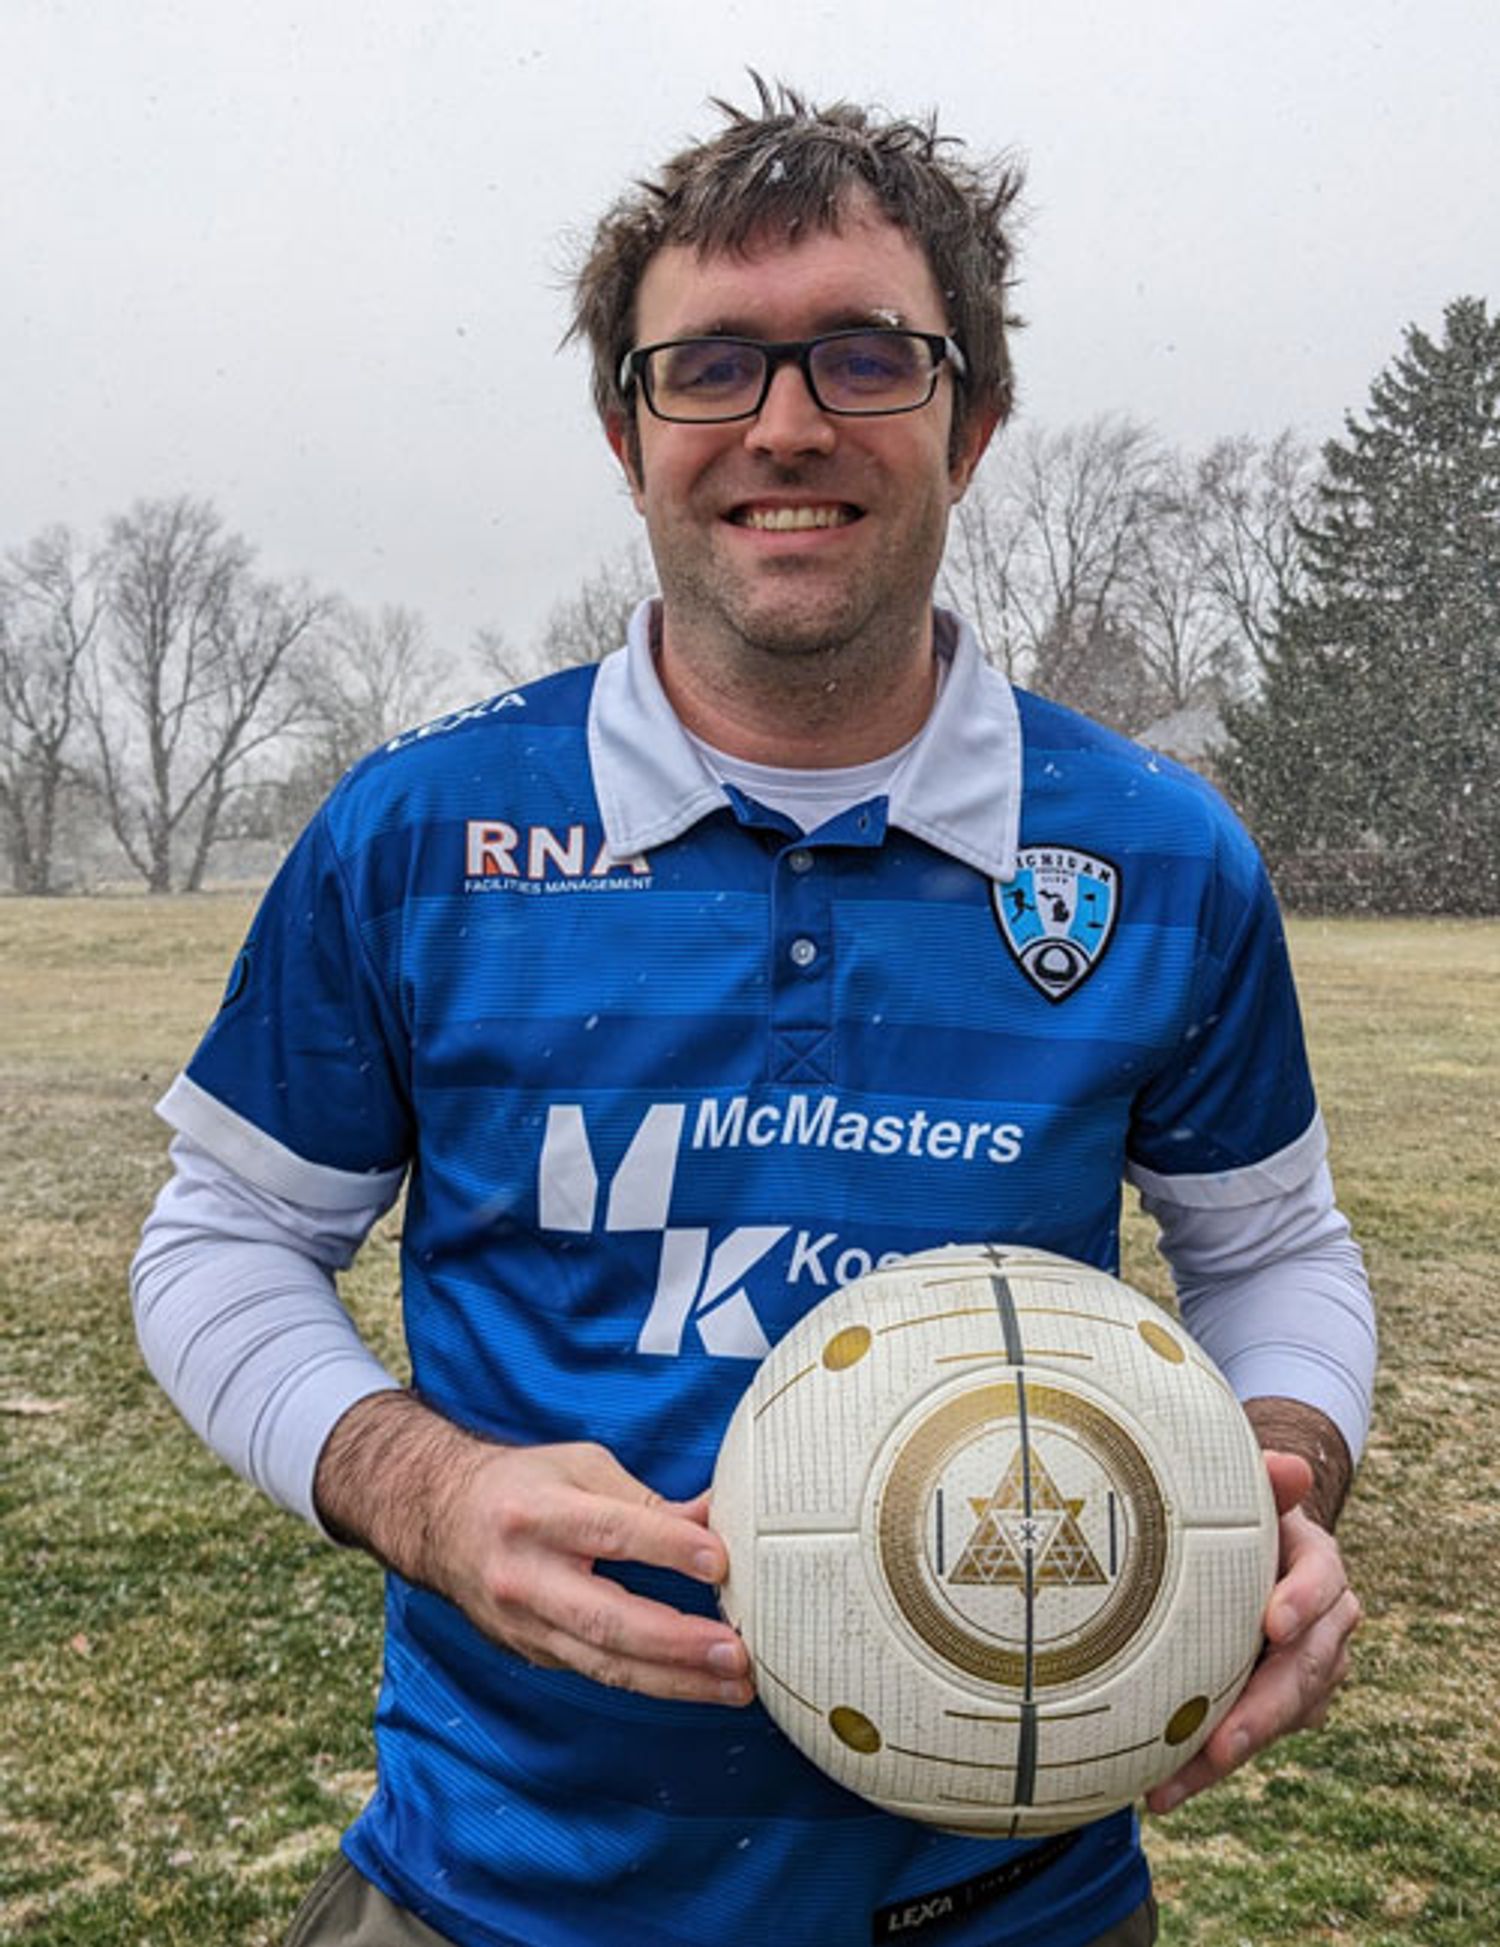 The FGB 'Built for Footgolf' - My brother and I founded the Michigan FootGolf Club and are close with the AFGL, and I've been talking up your balls since I tried one late last year. I will actually be playing with the U8 instead of my Jabulani, which feels crazy to say out loud. You guys rock, thank you for the excellent ball at a reasonable price :)